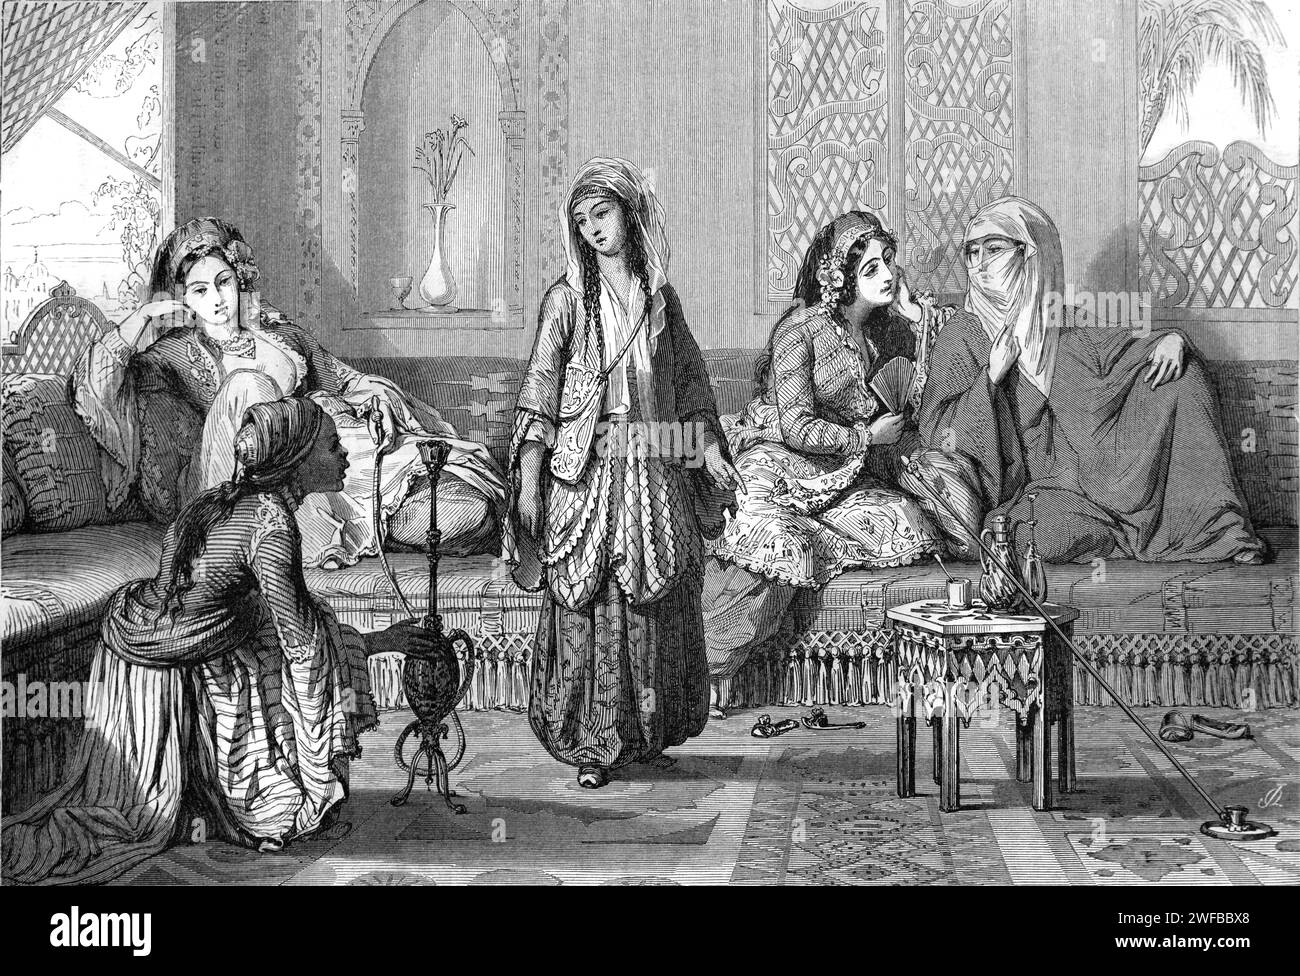 Turkish Women and African Servant or Slave with Waterpipe, Hookah or Narghile Reclining on Ottoam Sofa or Divan in the Harem of Topkapi Palace Istanbul Turkey. Vintage or Historical Engraving or Illustration 1863 Stock Photo